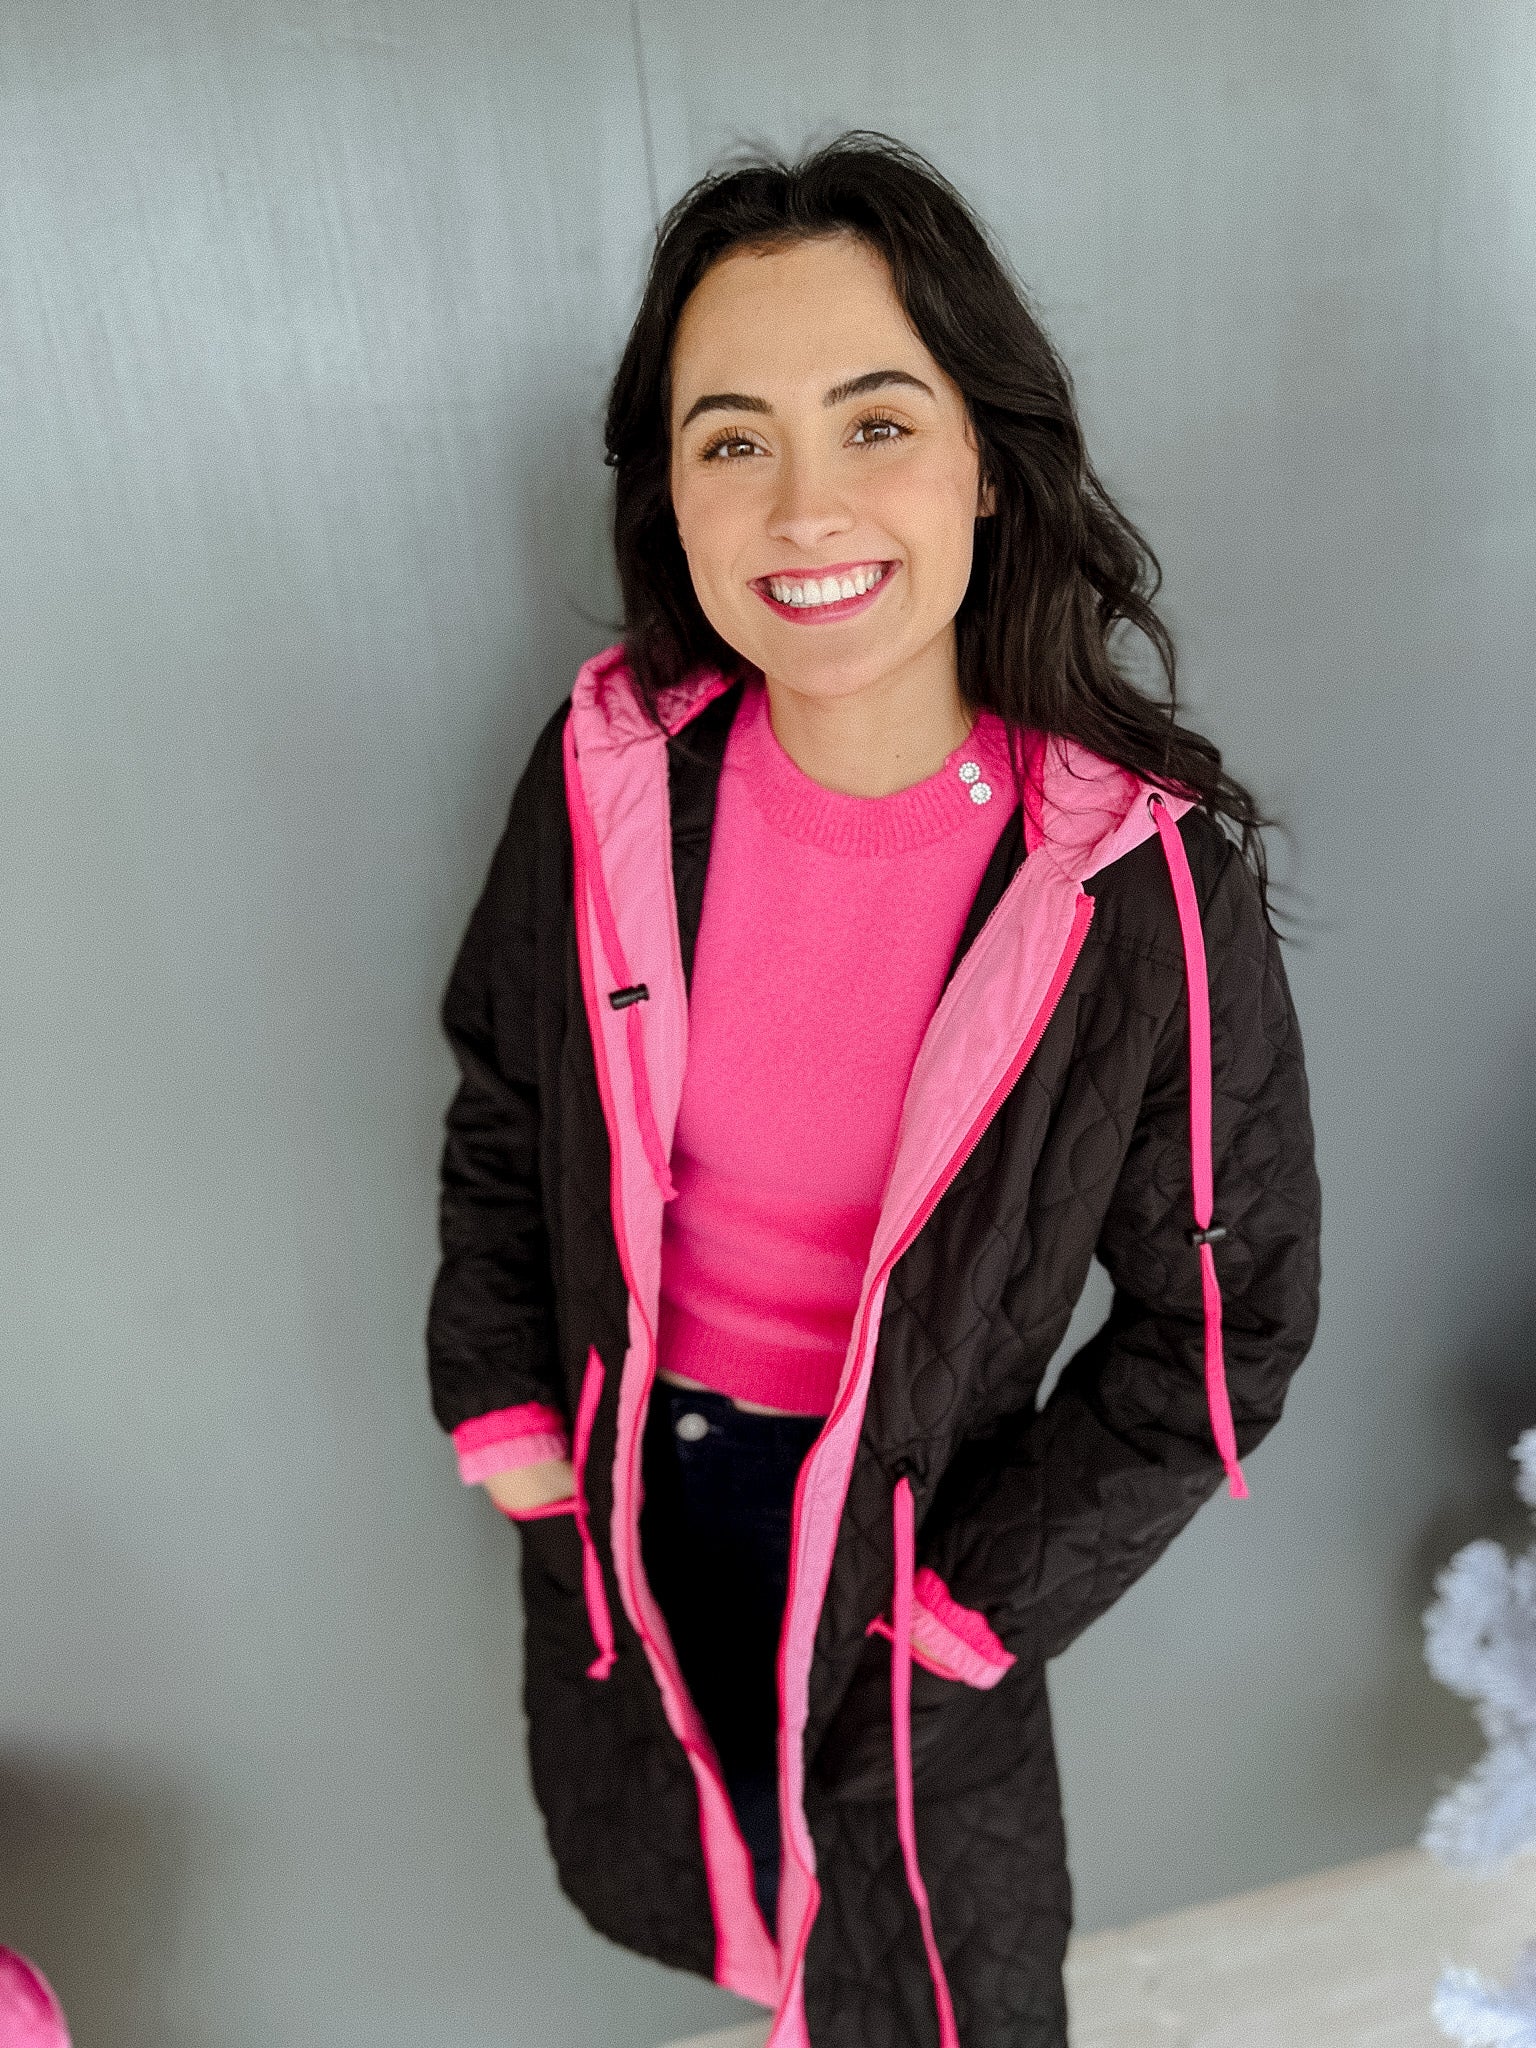 Malcolm Quilted Coat - Black + Hot Pink